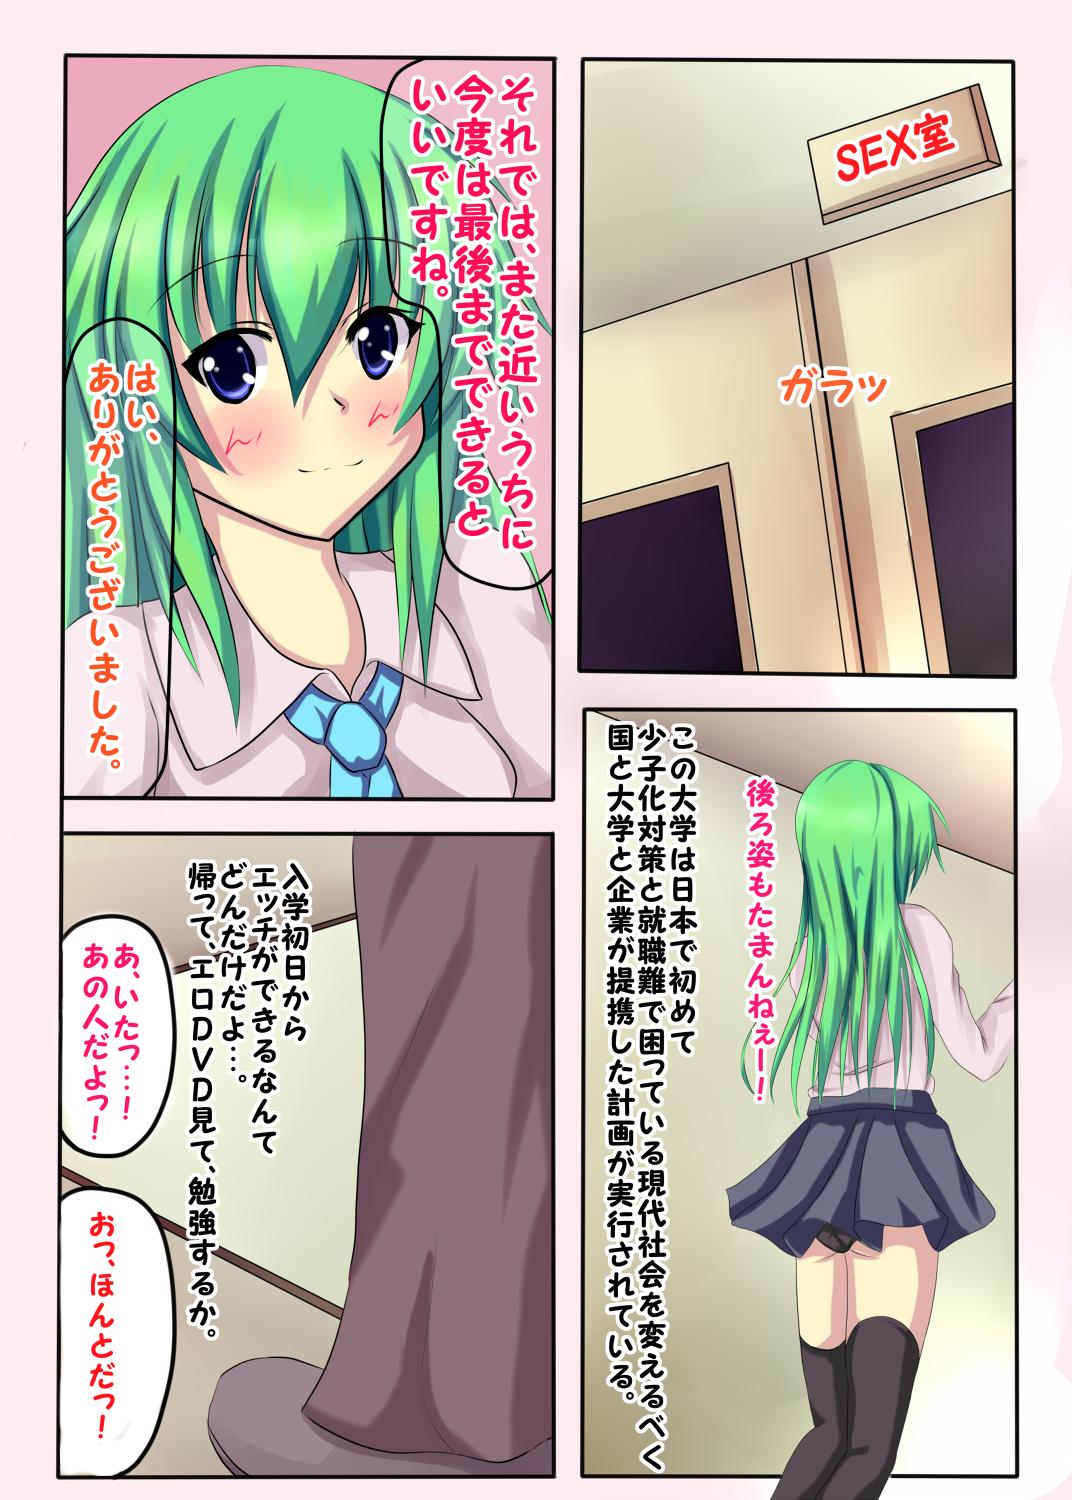 Milf Porn 東方征服学園～童貞生徒の初めては早苗さん? - Touhou project Uncensored - Page 12